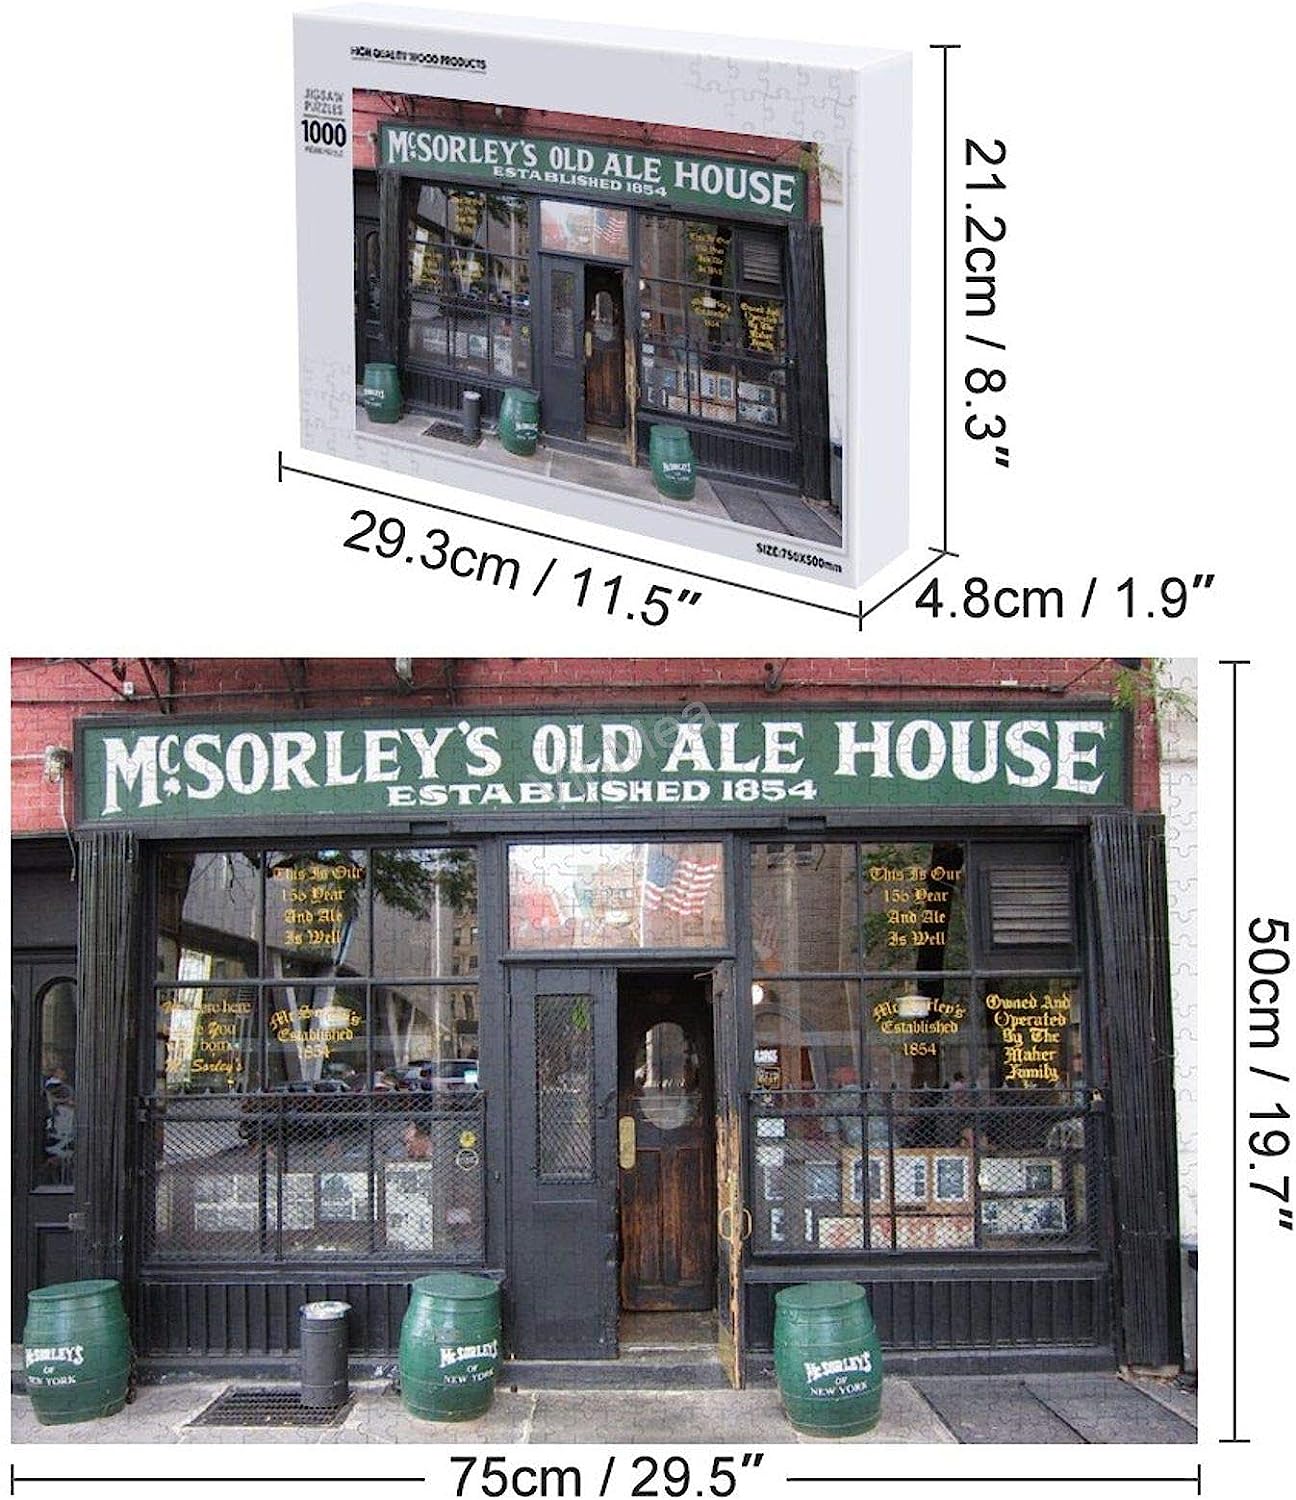 1000 Piece Wooden Jigsaw Puzzle McSorley's Old Ale House Jigsaw Puzzles Fun Game Educational Toys Birthday Gifts